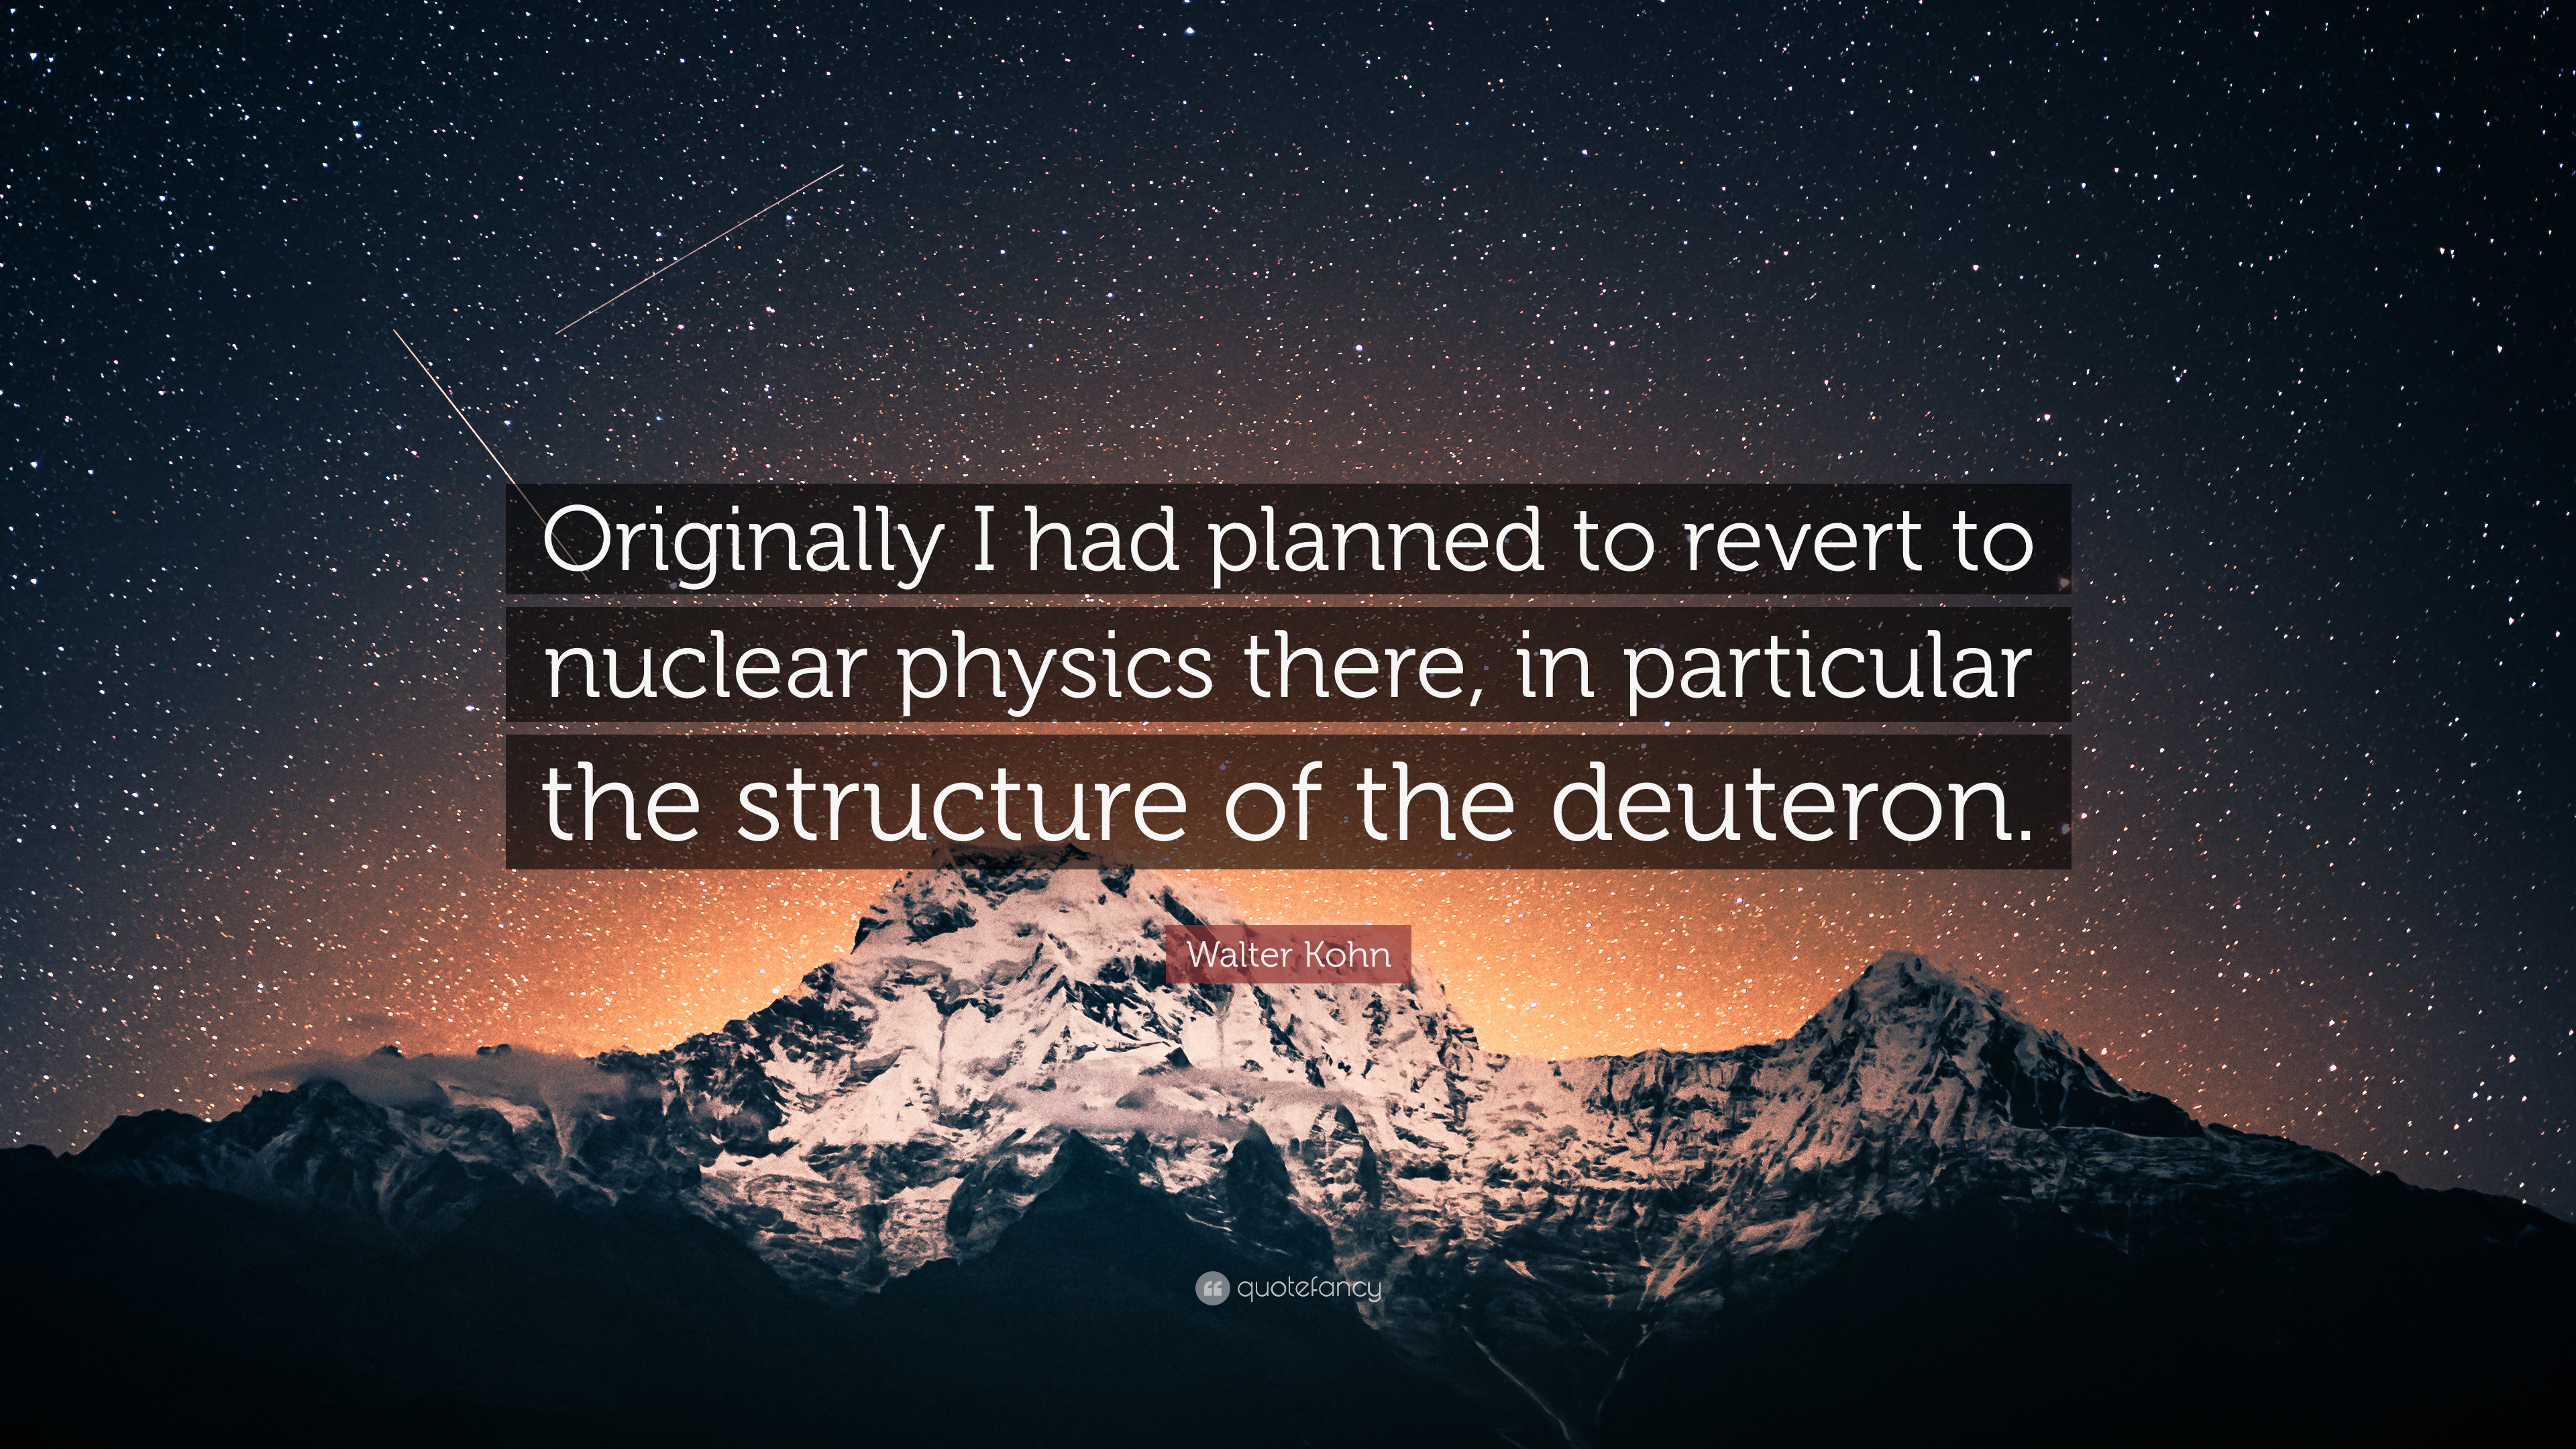 Walter Kohn Quote: “Originally I had planned to revert to nuclear physics there, in particular the